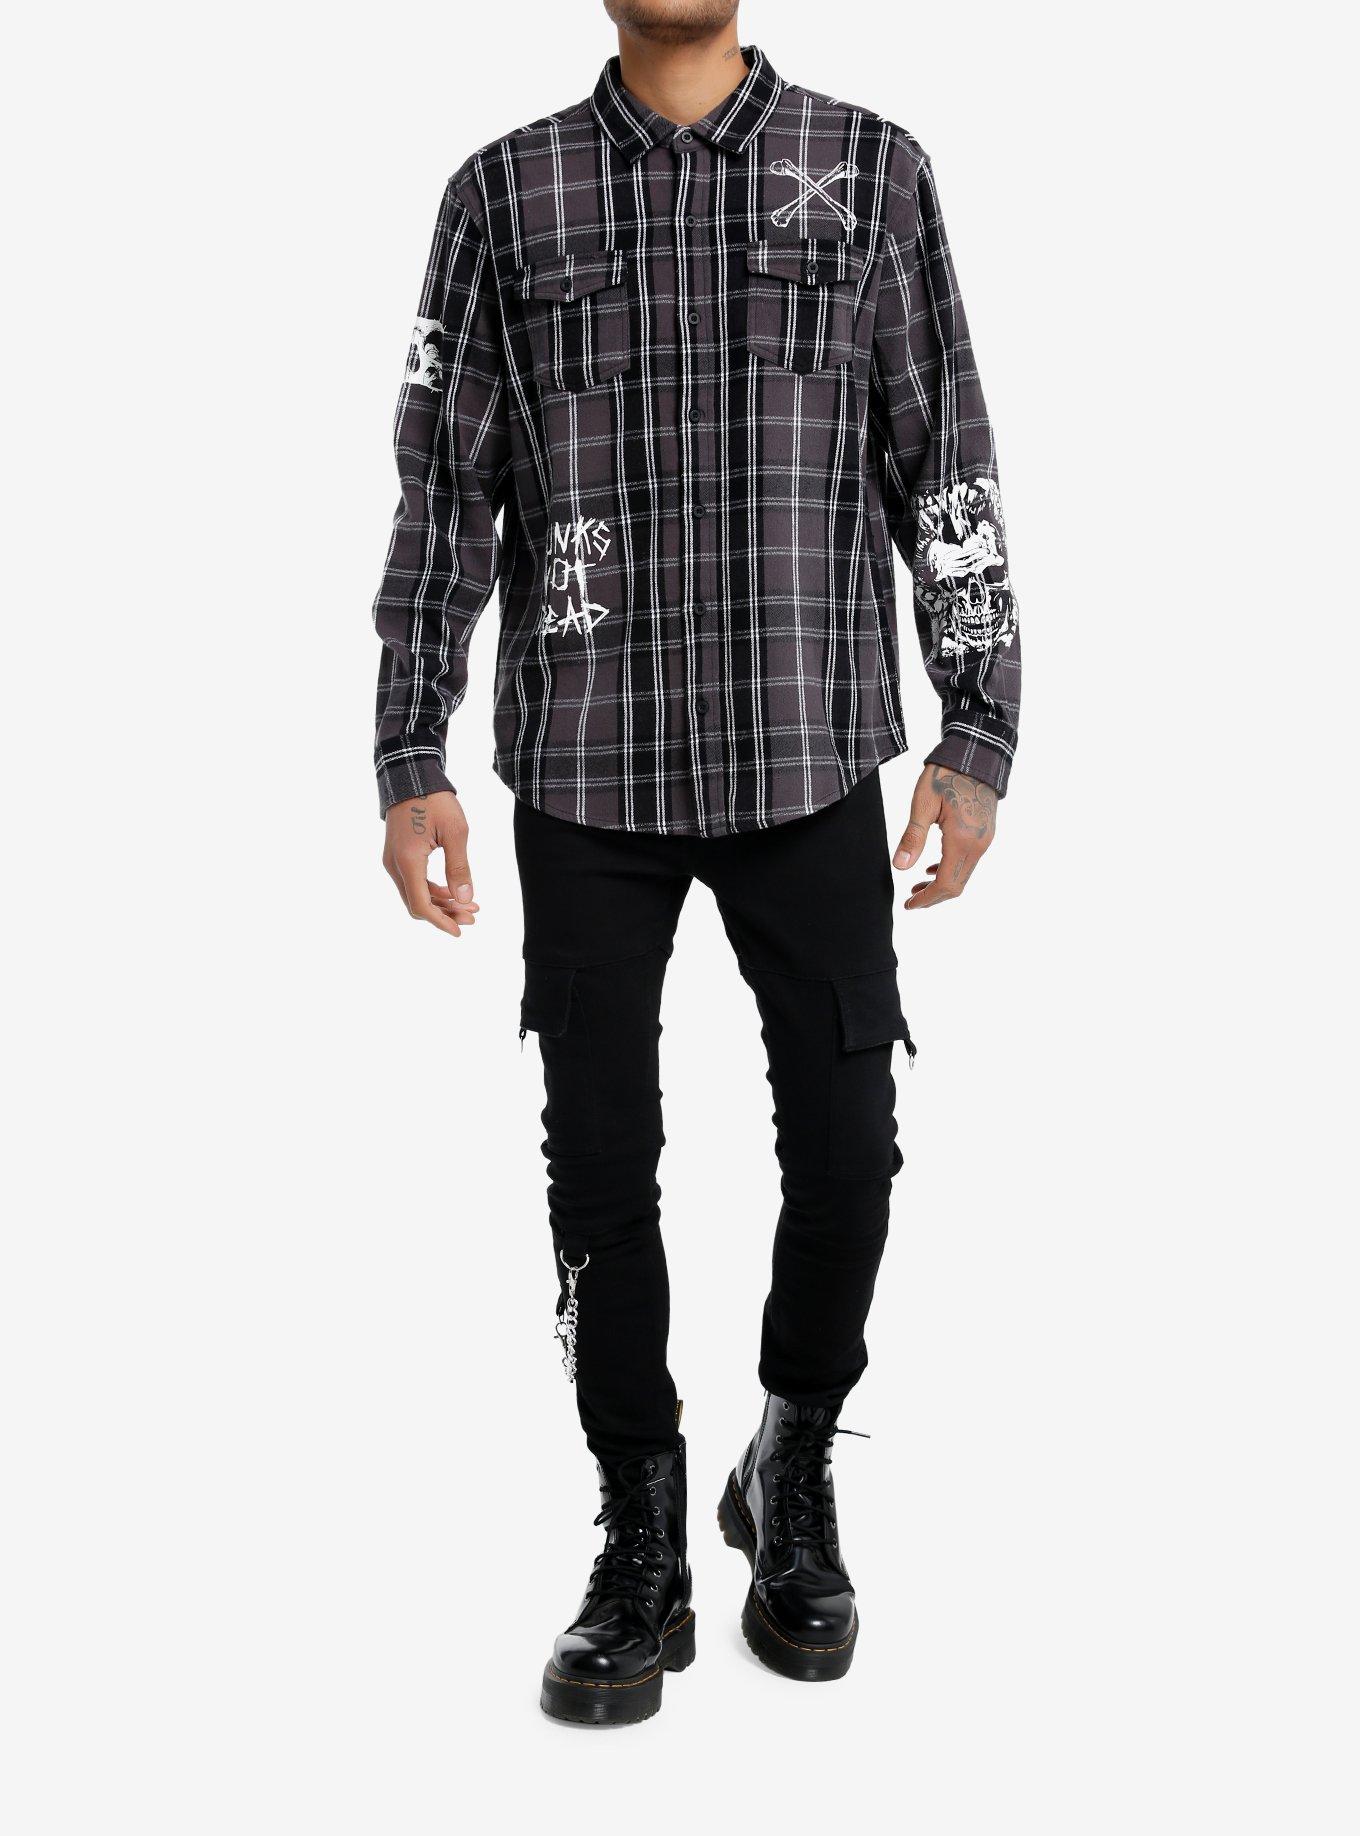 Social Collision® Black & White Plaid Punk Icons Long-Sleeve Woven Button-Up, , alternate